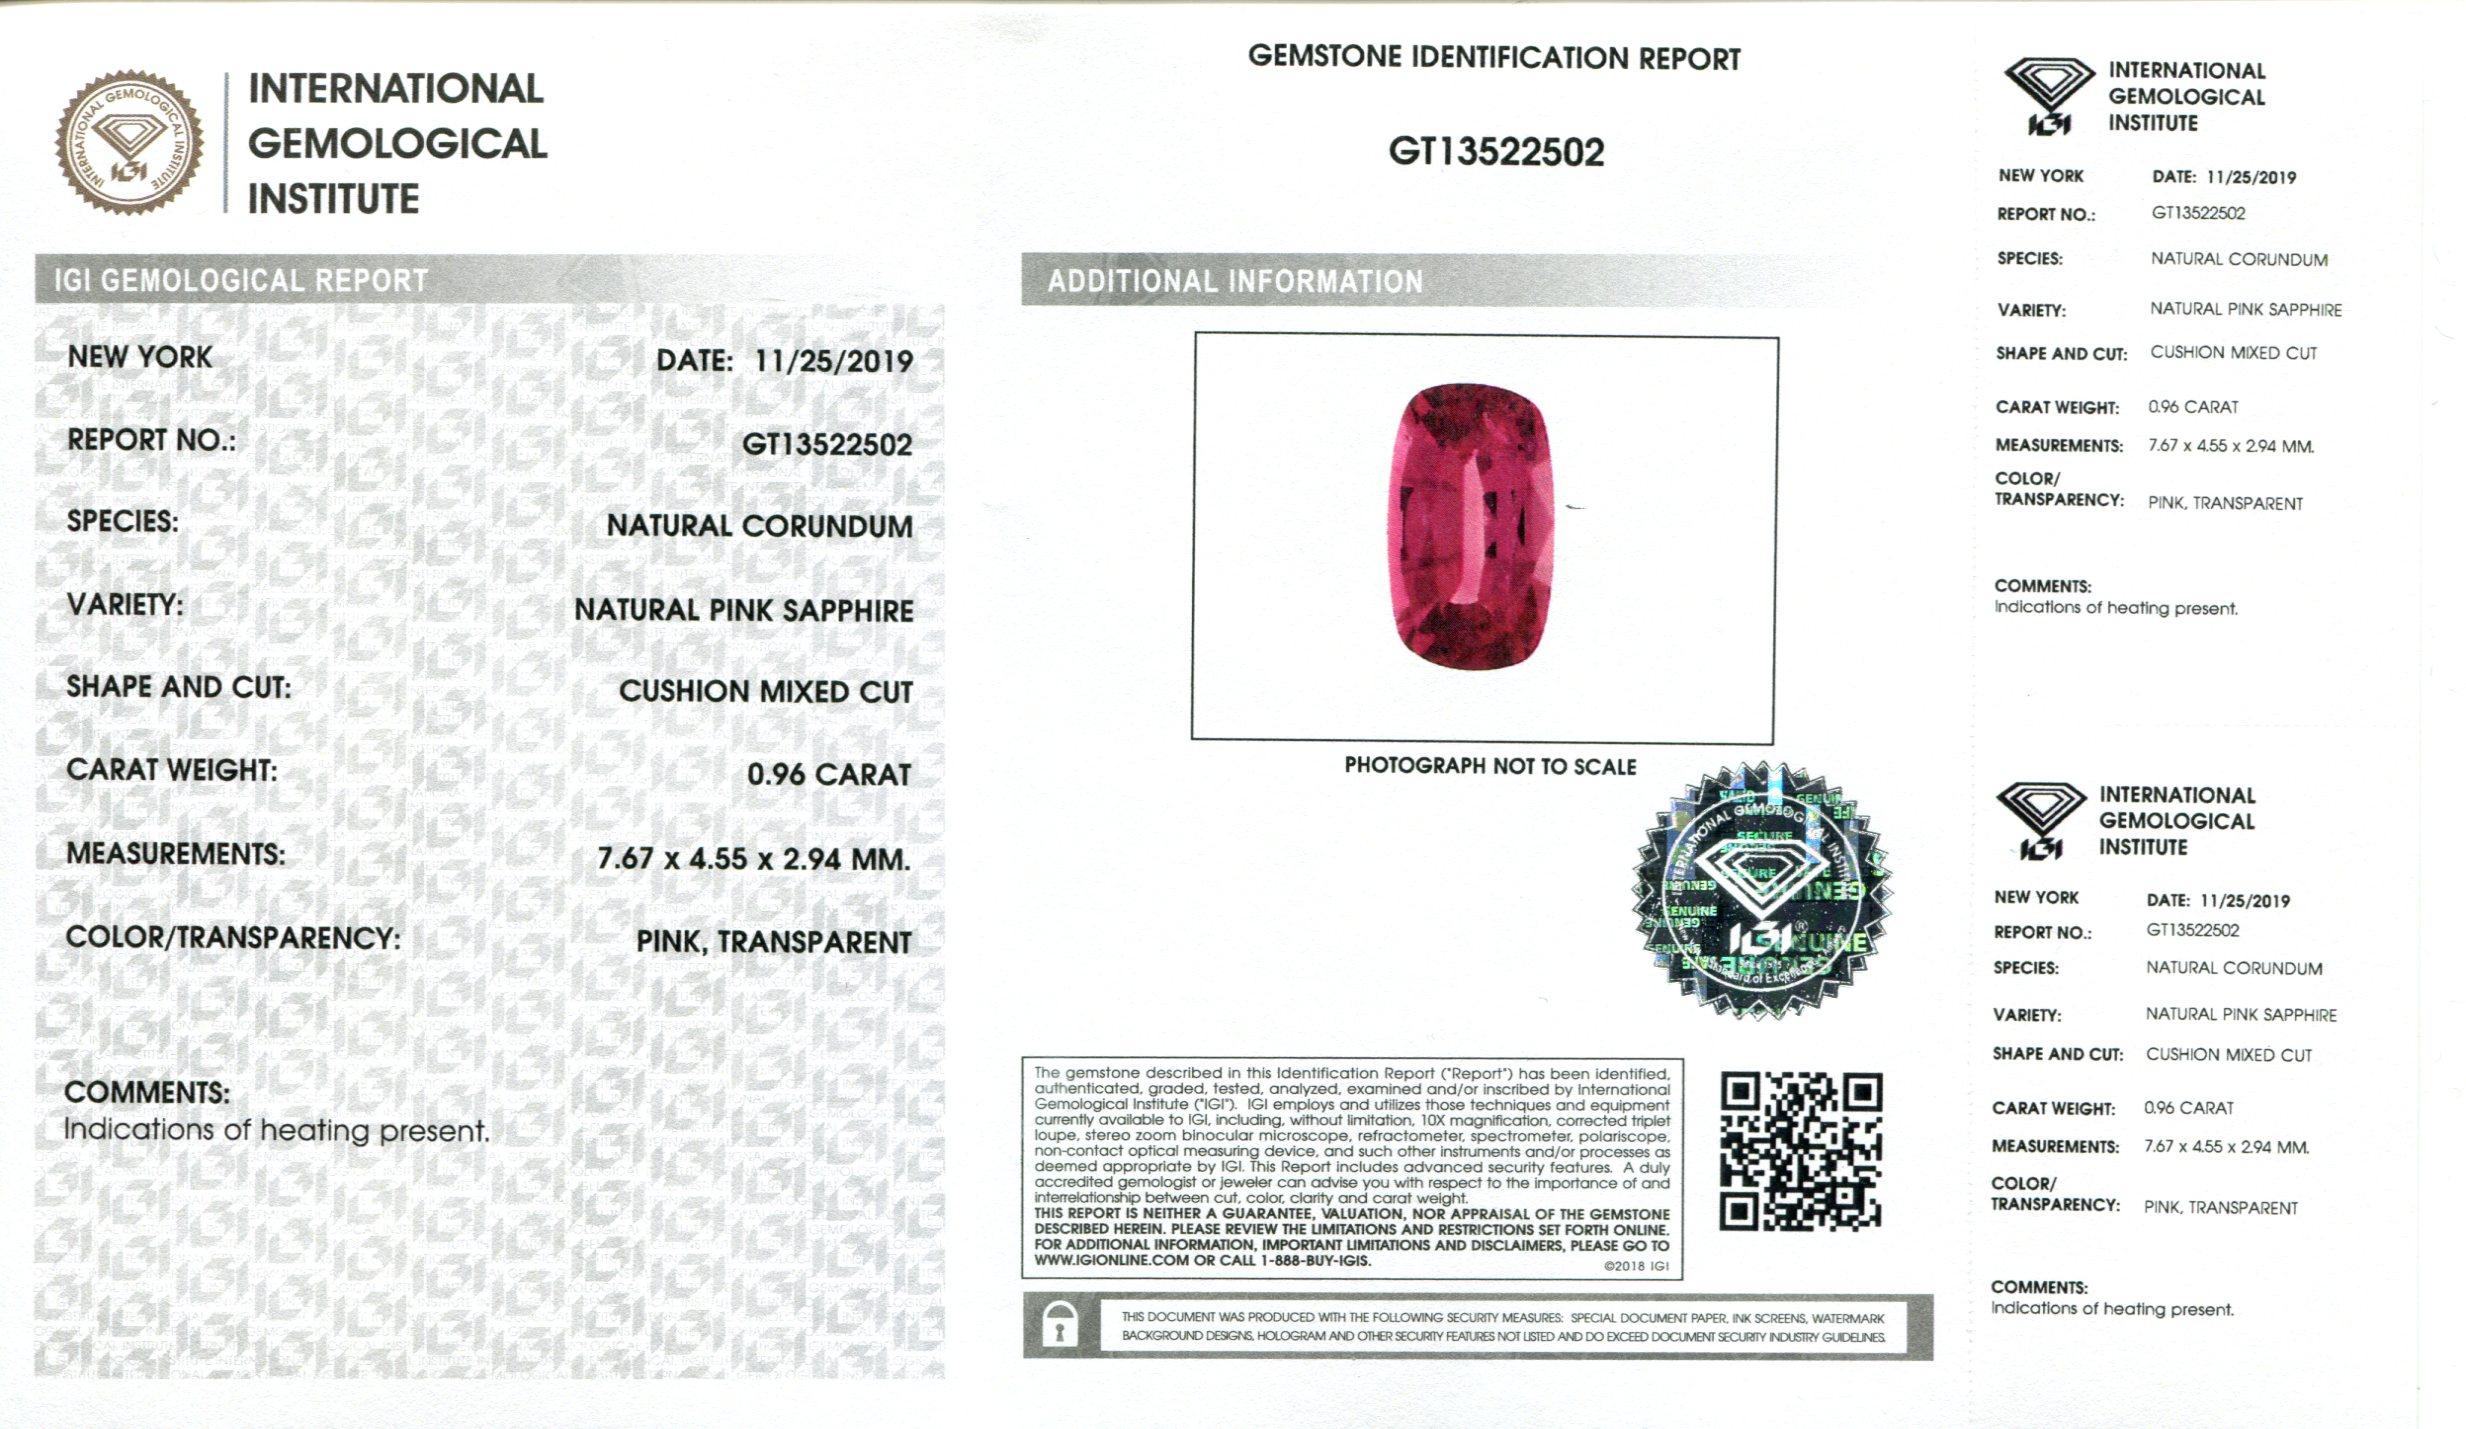 Description:

One Loose Pink Sapphire
Report Number: GT13522502
Species: Corundum
Variety: Pink Sapphire
Weight: 0.96 cts
Measurements: 7.67x4.55x2.94 mm
Shape: Cushion
Cutting Style Crown: Mixed Cut
Cutting Style Pavilion: Mixed Cut 
Transparency: